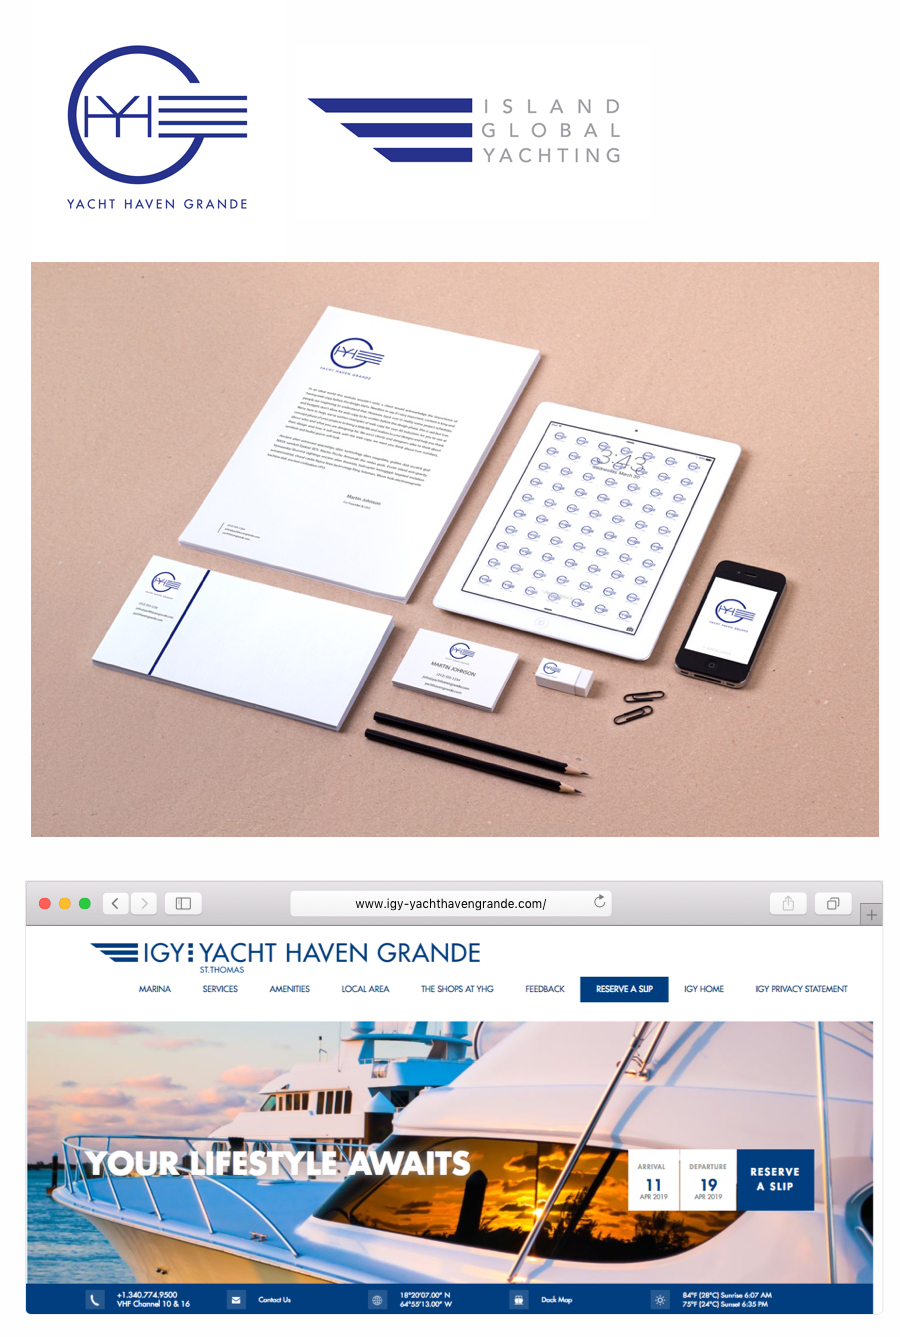 Logo designs for two yachting companies, shown in application to full stationery mock up, iPhone, iPad, and website frame.